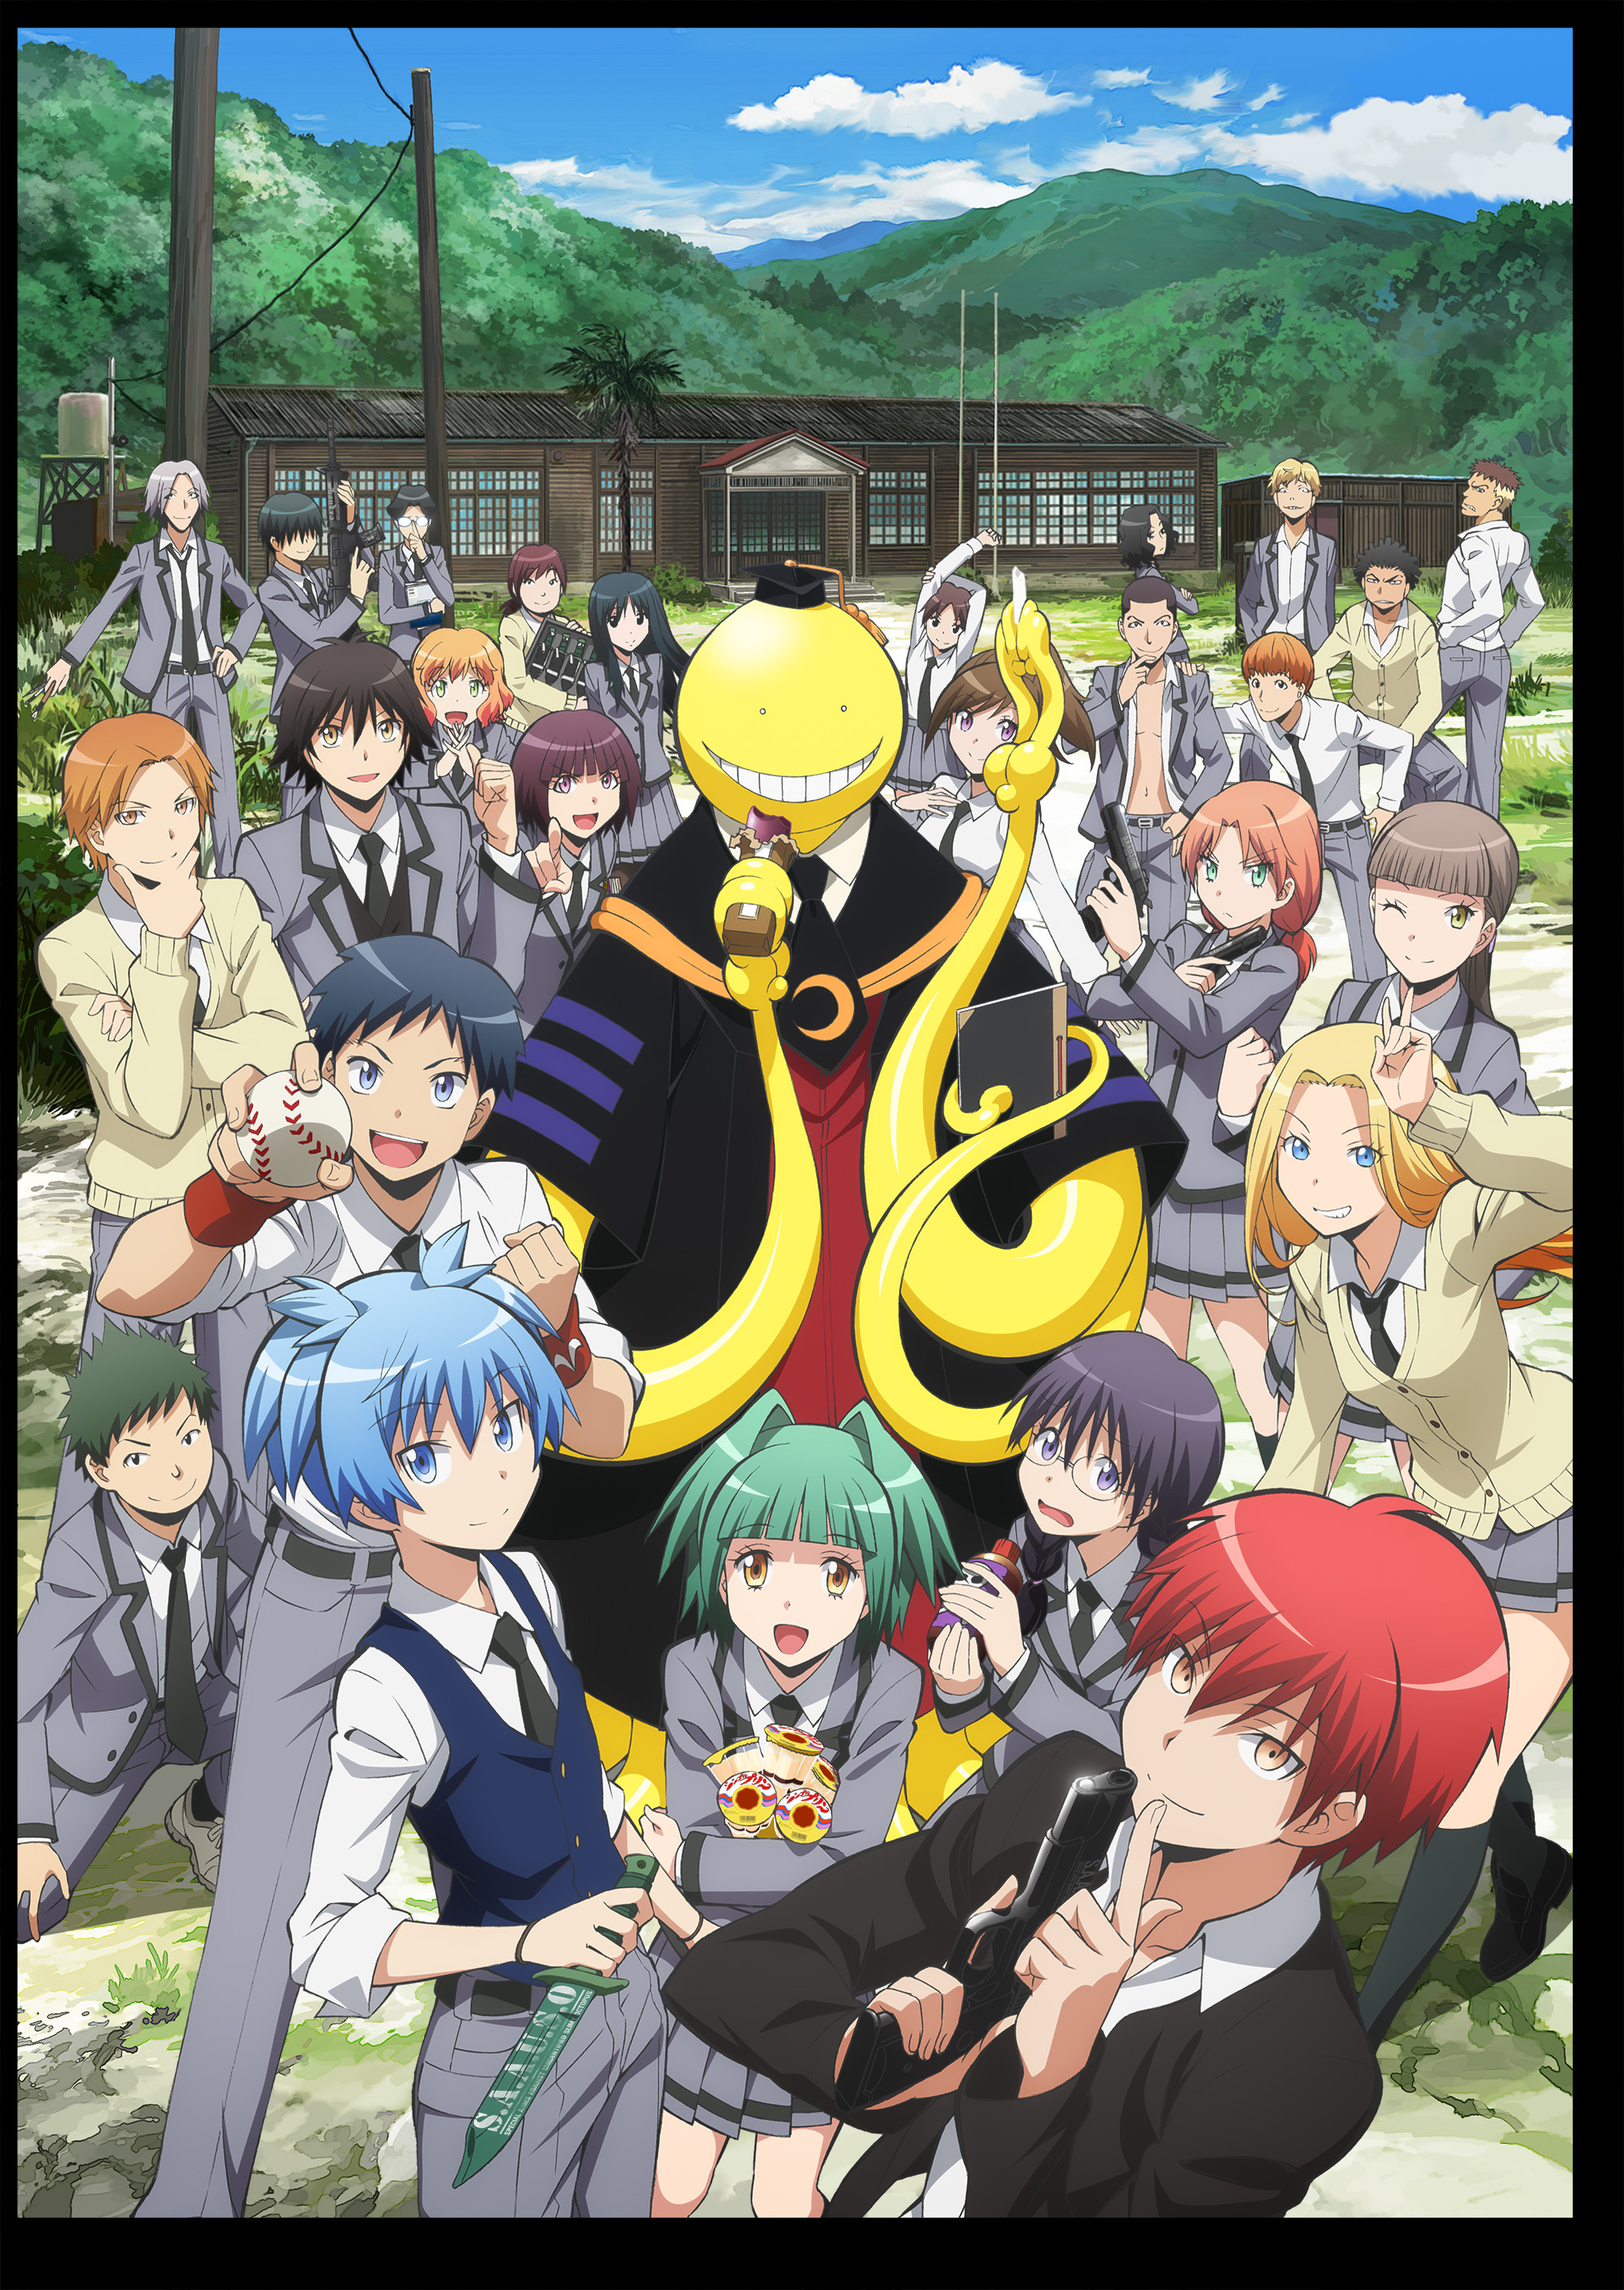 Assassination Classroom Anime Hd Wallpapers Wallpaper Cave